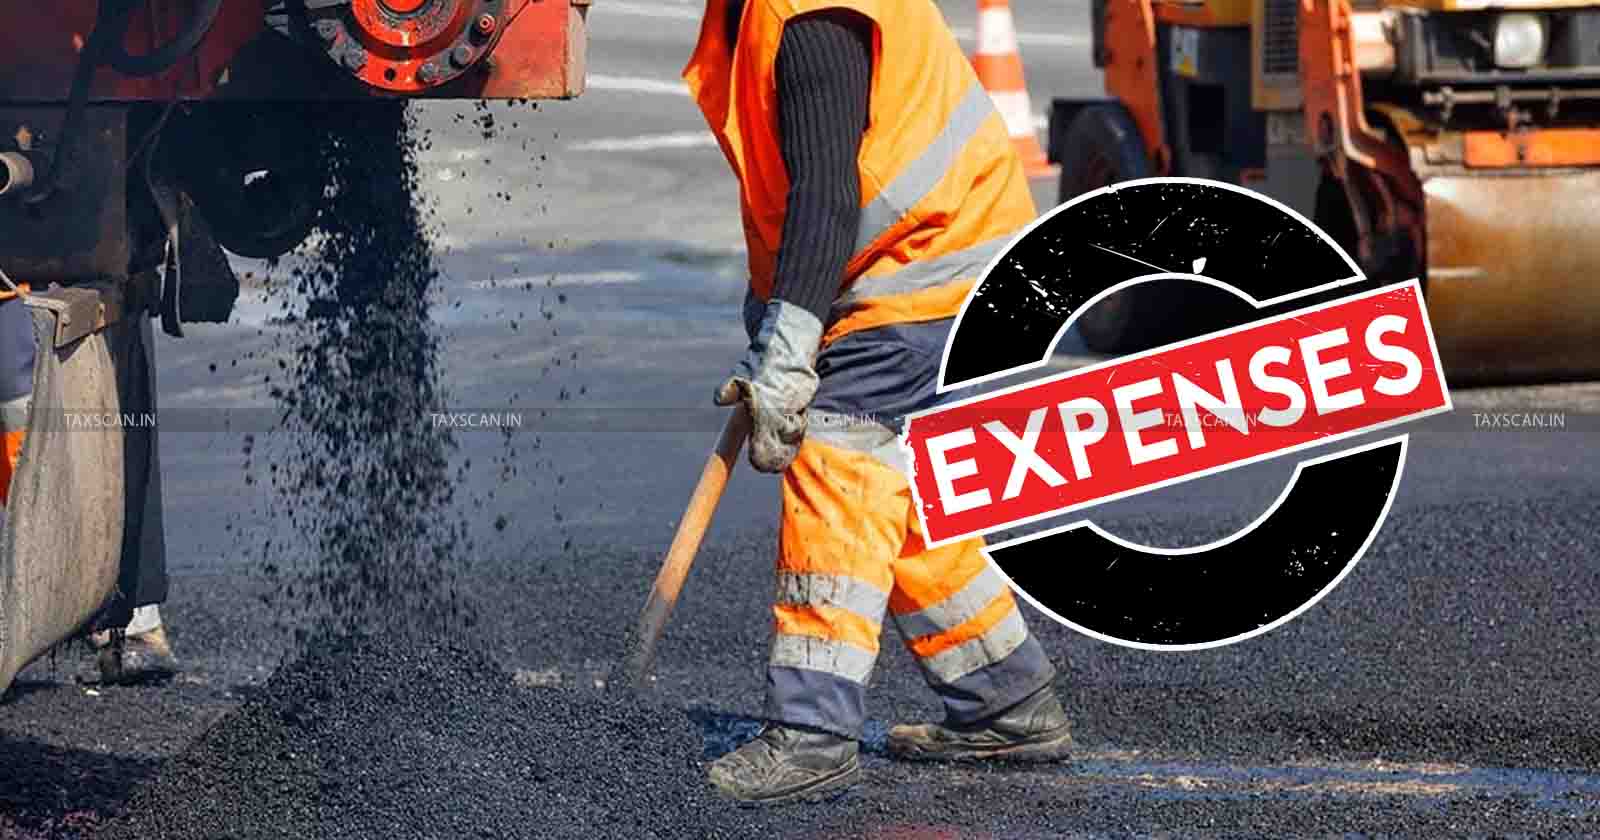 Road Construction Expenses - Road Construction - Business Expenditure - ITAT - Income Tax - Highway - Factory - taxscan